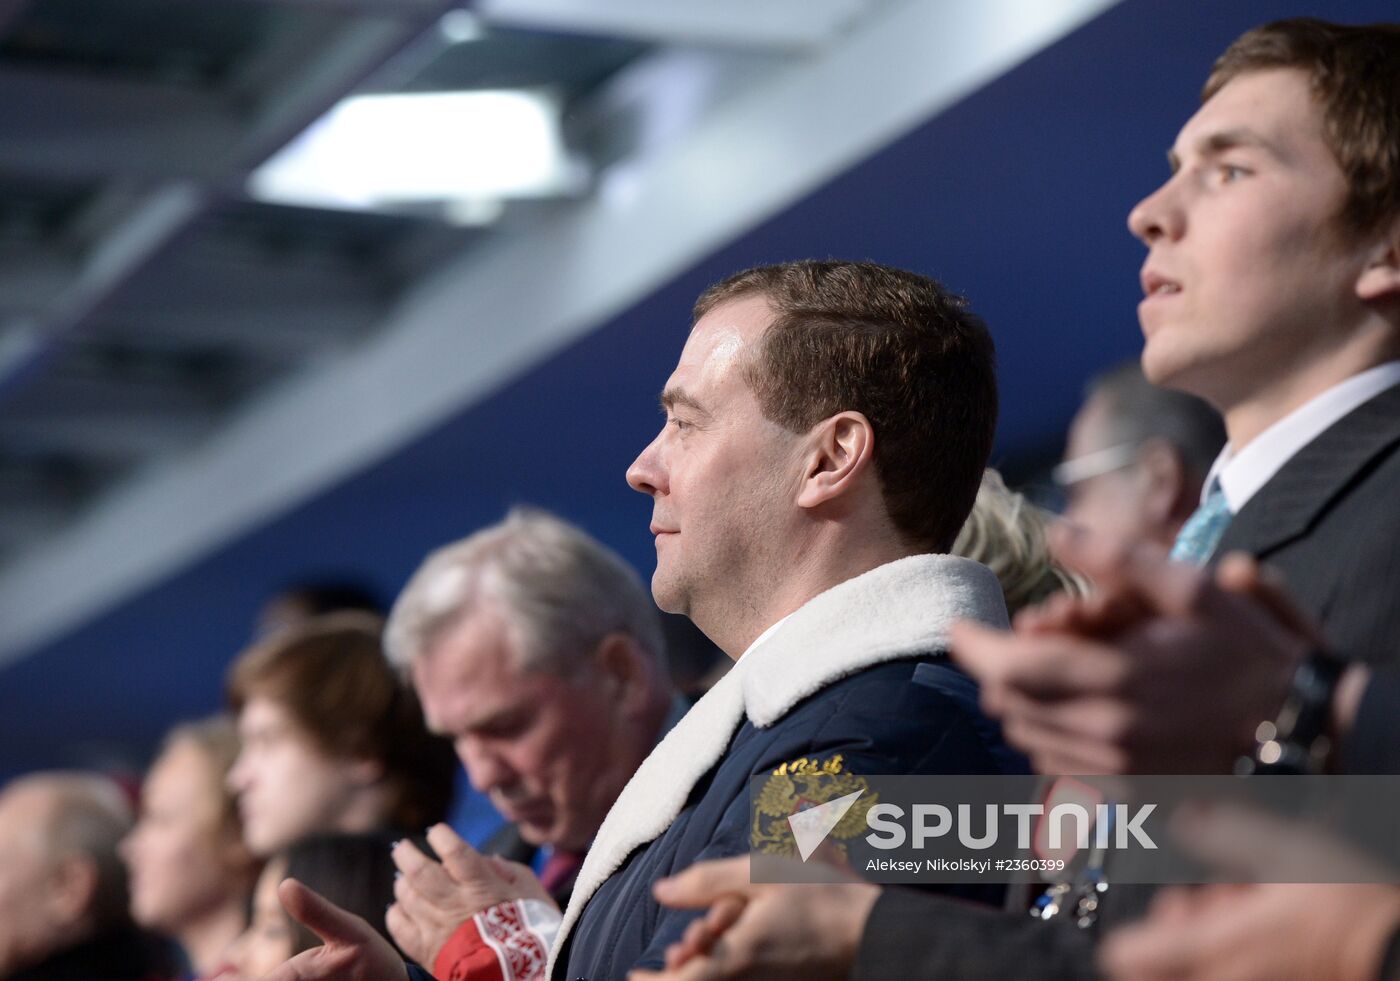 Medvedev at opening ceremony of XXII Olympic Winter Games